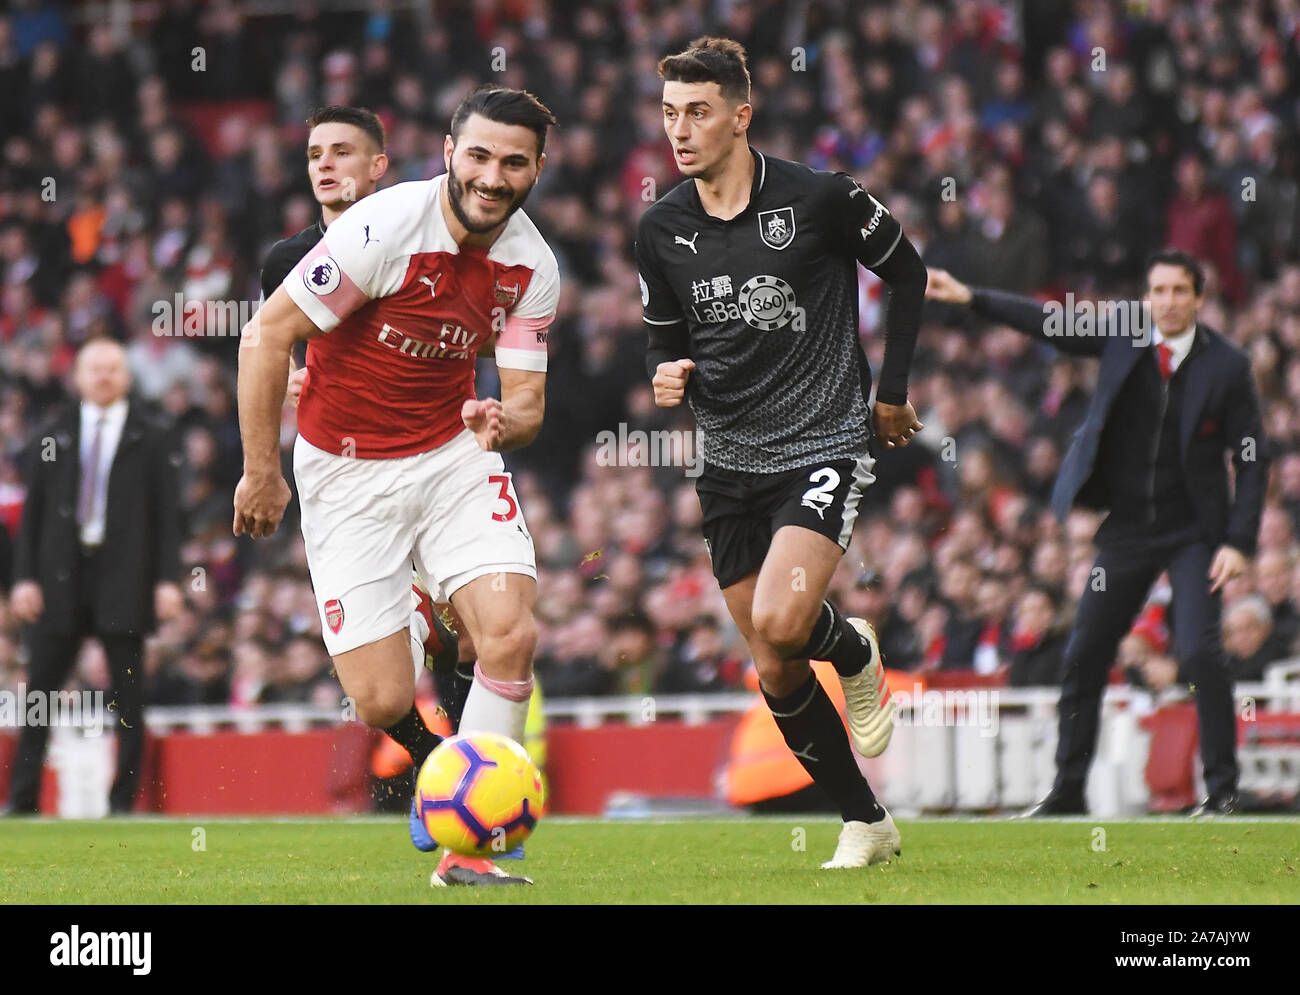 LONDON, ENGLAND - DECEMBER 22, 2018: Sead Kolasinac of Arsenal (L) and Matthew Lowton of Burnley (R) pictured during the 2018/19 Premier League game between Arsenal FC and Burnley FC at Emirates Stadium. Stock Photo